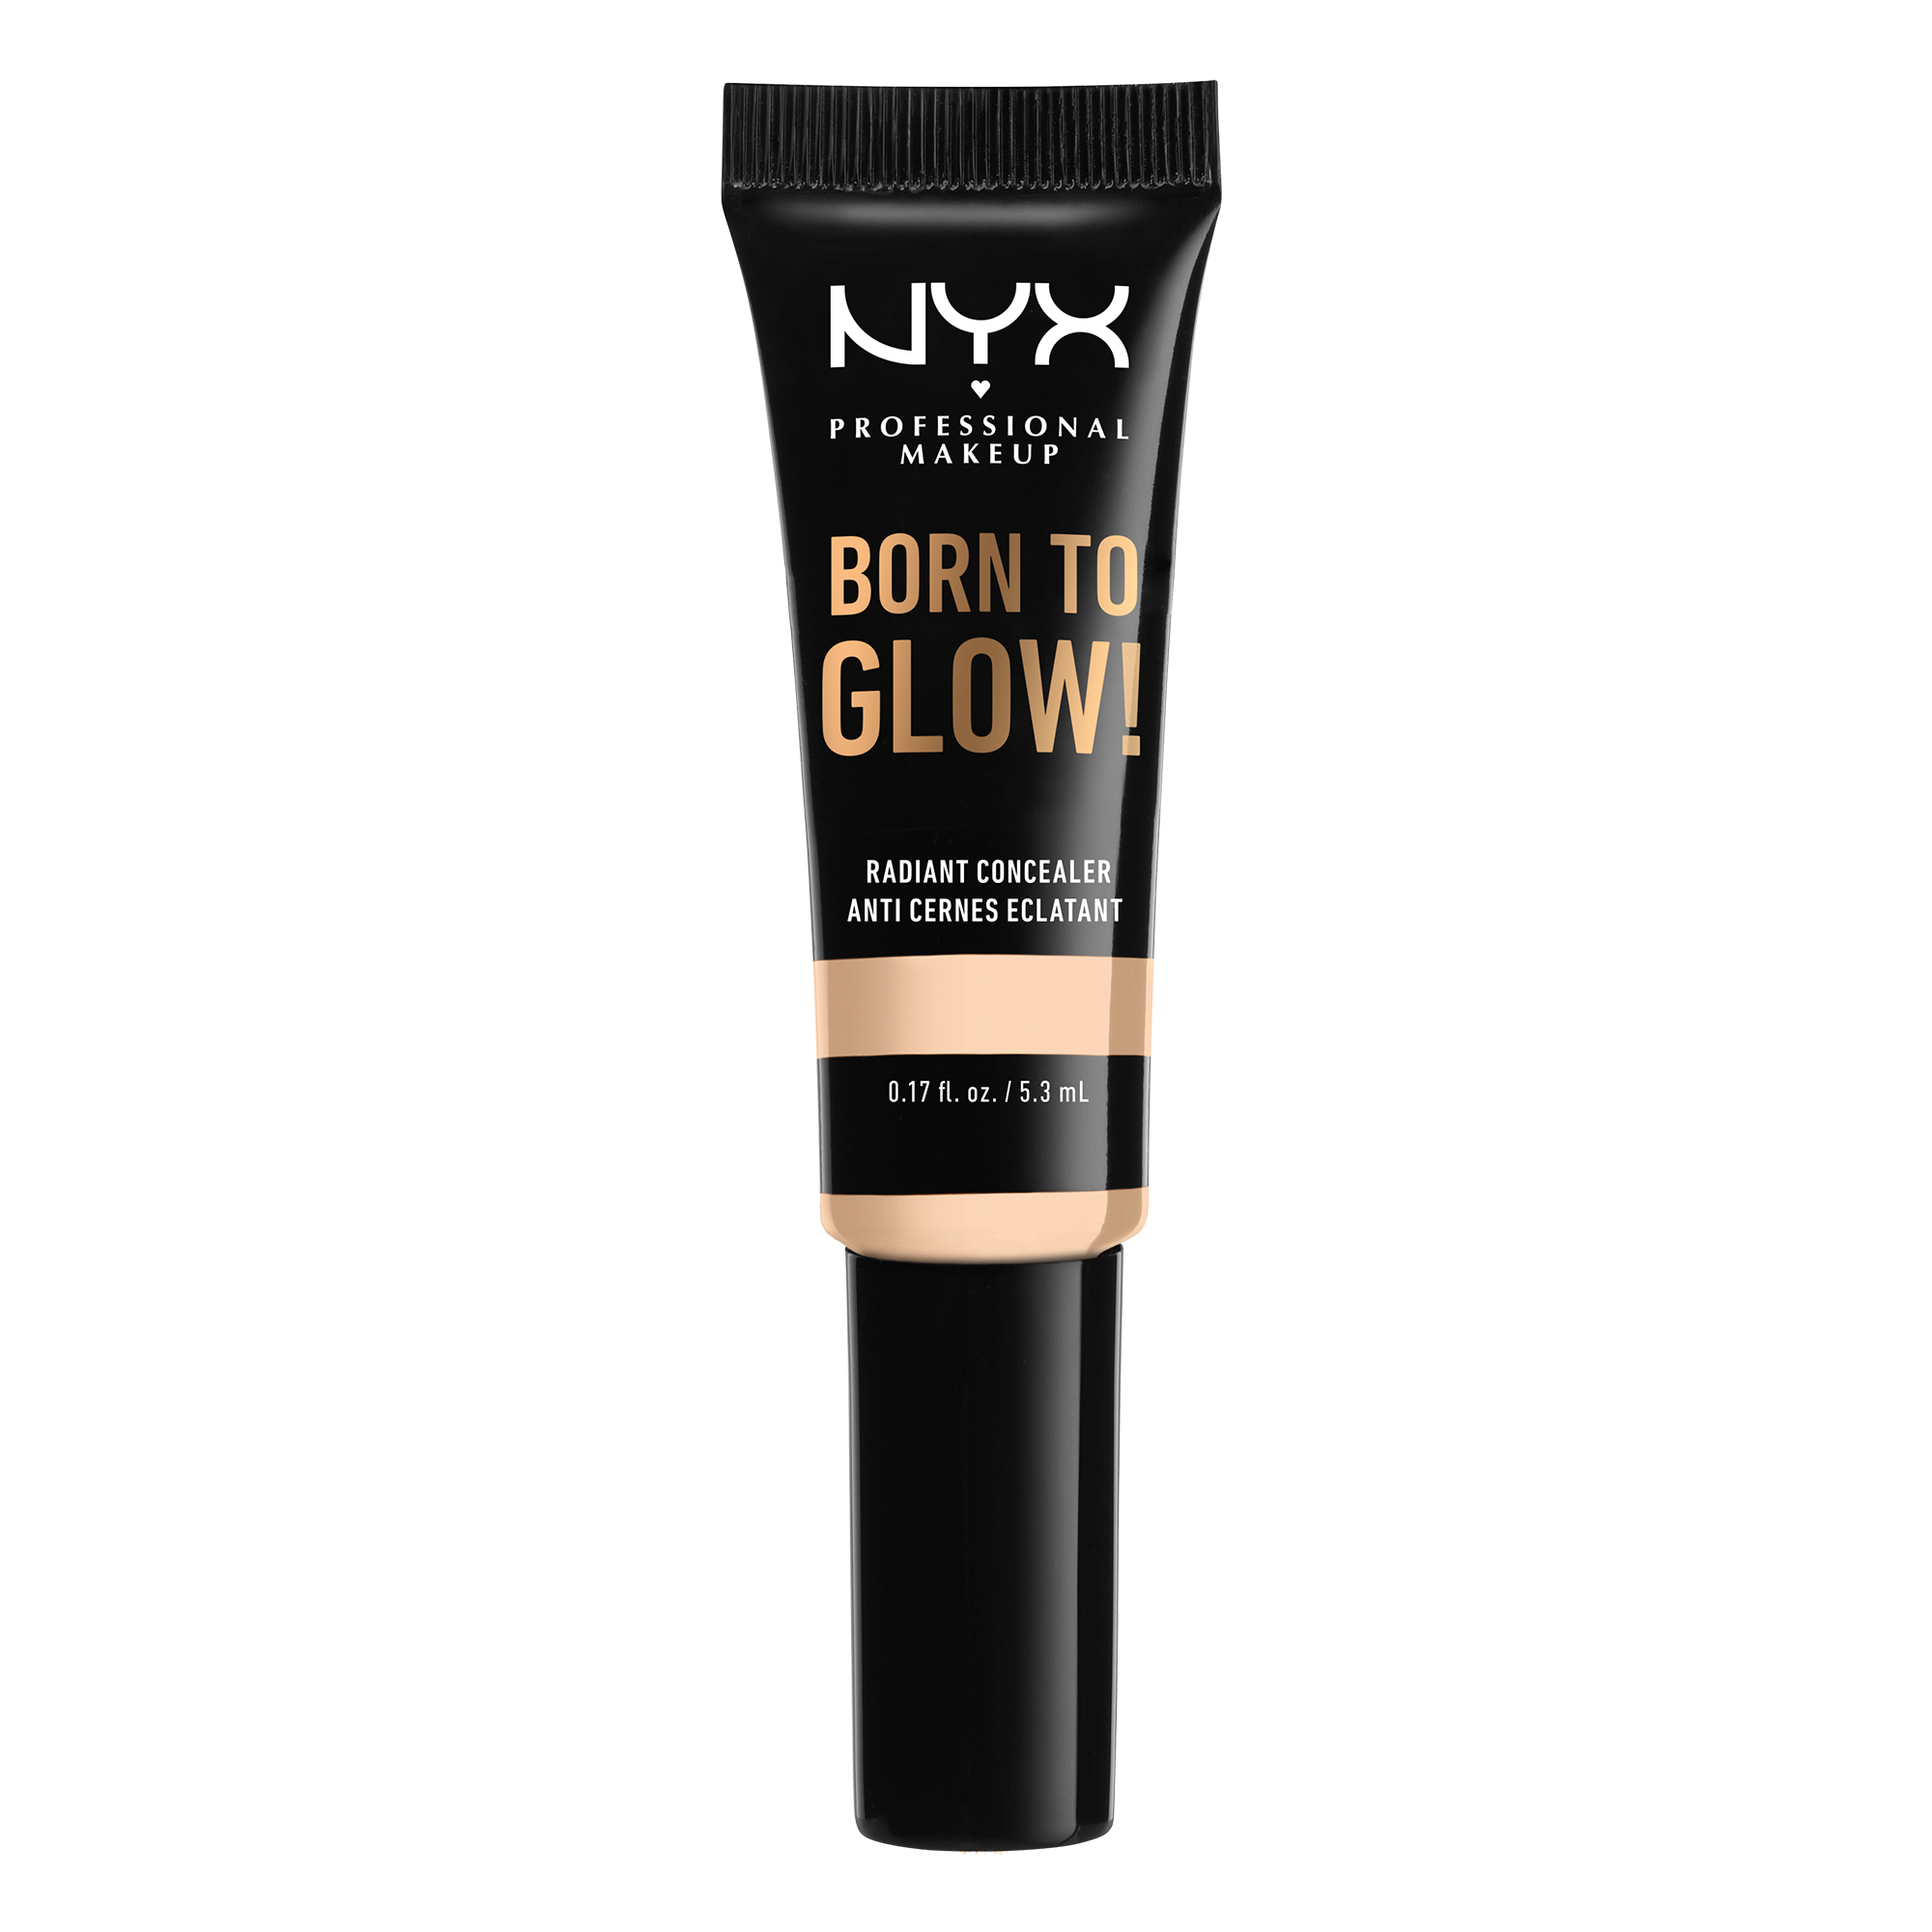 NYX Professional Makeup Born To Glow Radiant Undereye Concealer, Pale - image 1 of 5